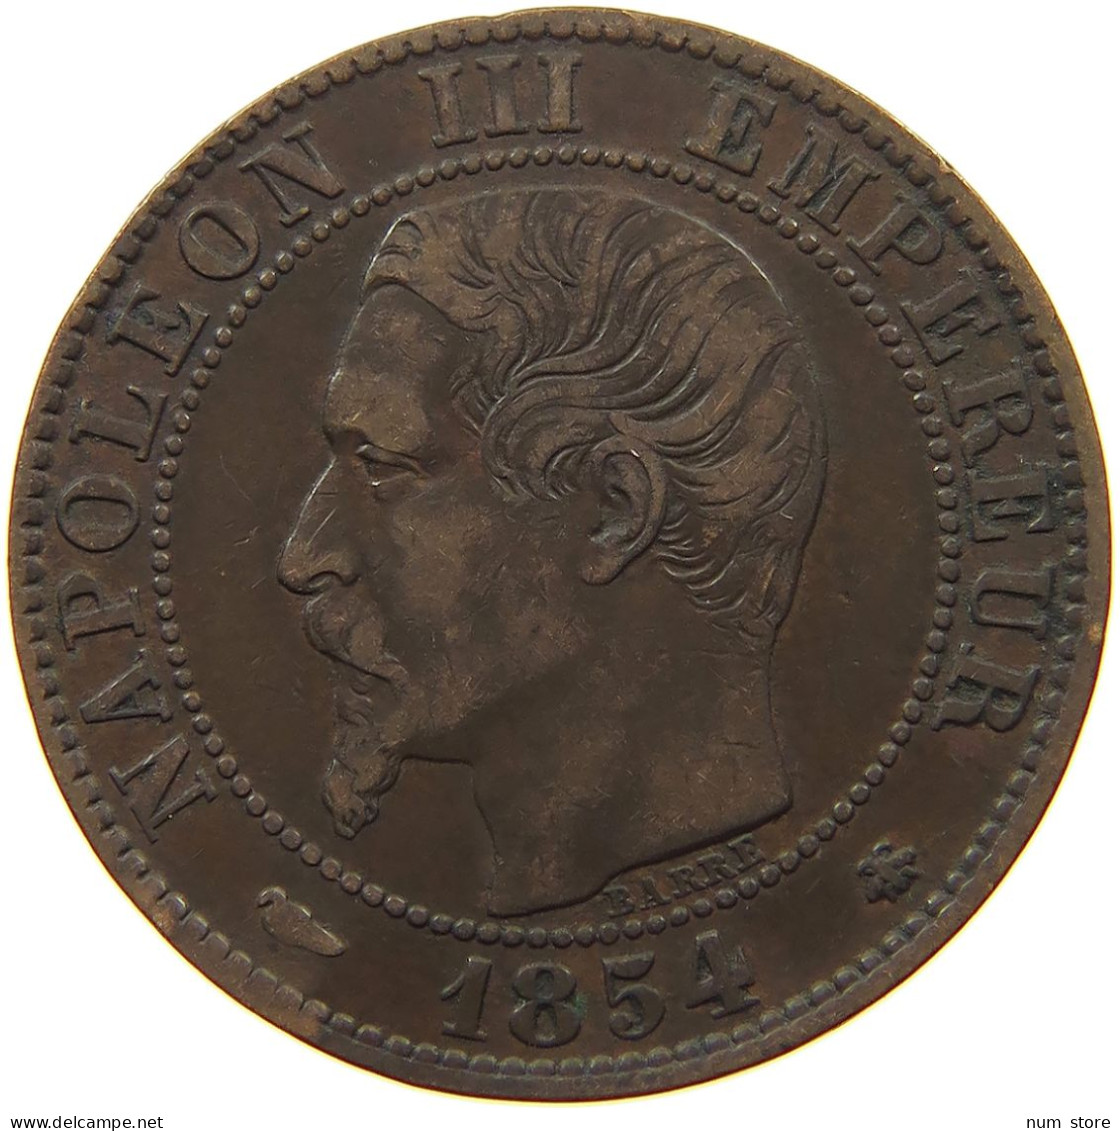 FRANCE 5 CENTIMES 1854 BB Napoleon III. (1852-1870) #s077 0371 - 5 Centimes